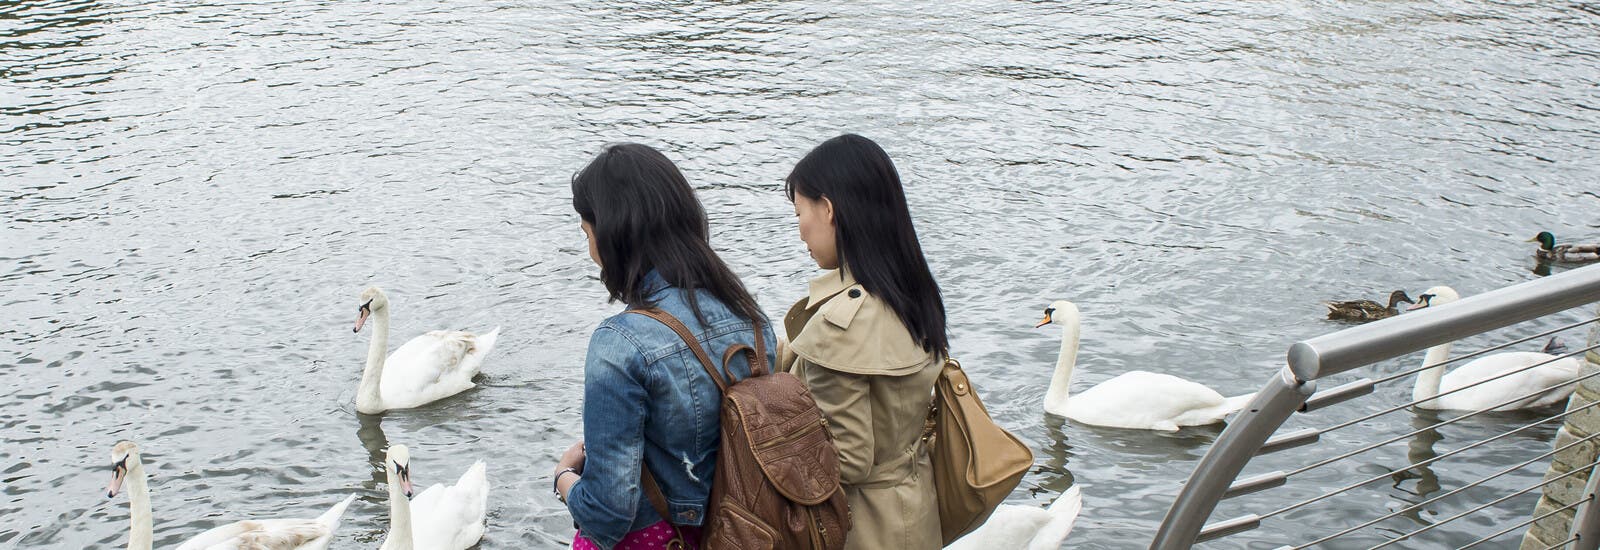 Two students looking at swans